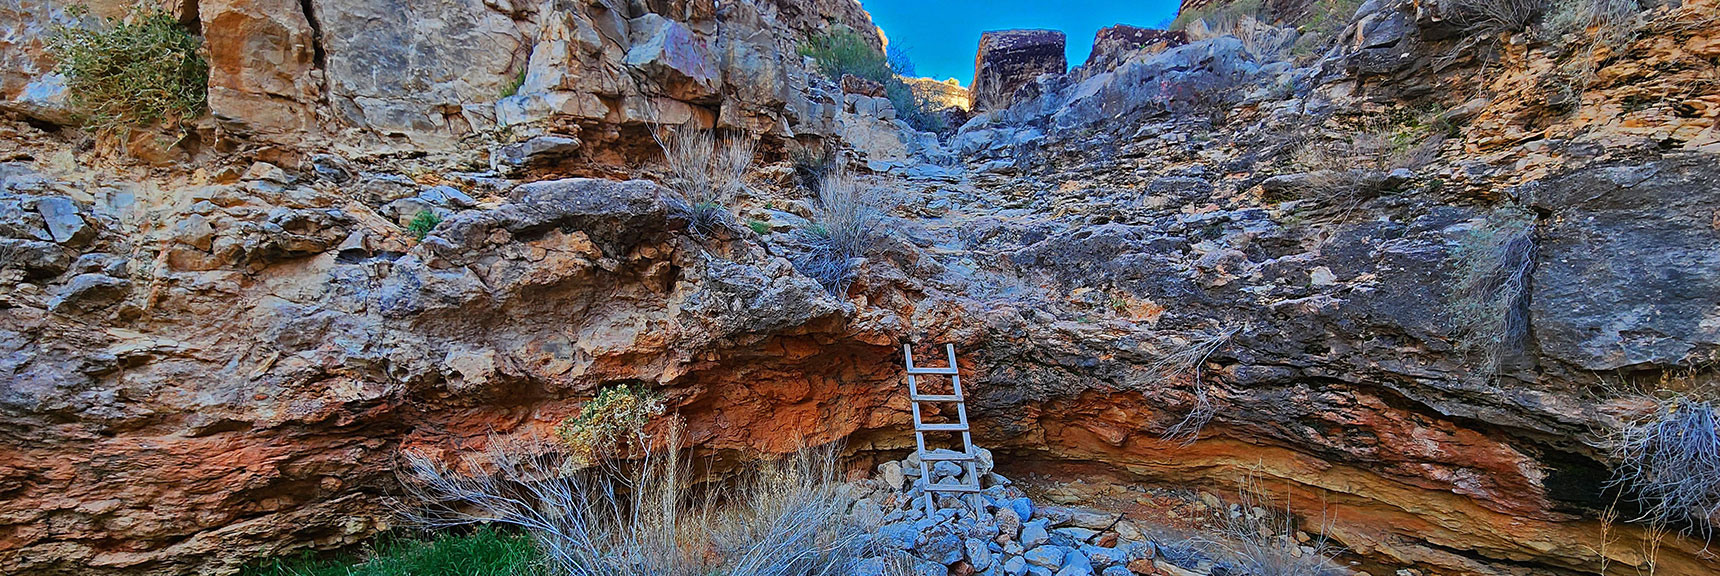 Experience Two Huge, Wild Canyons Just Outside of Las Vegas | Fossil Canyon | Cowboy Canyon | Blue Diamond Hill, Nevada